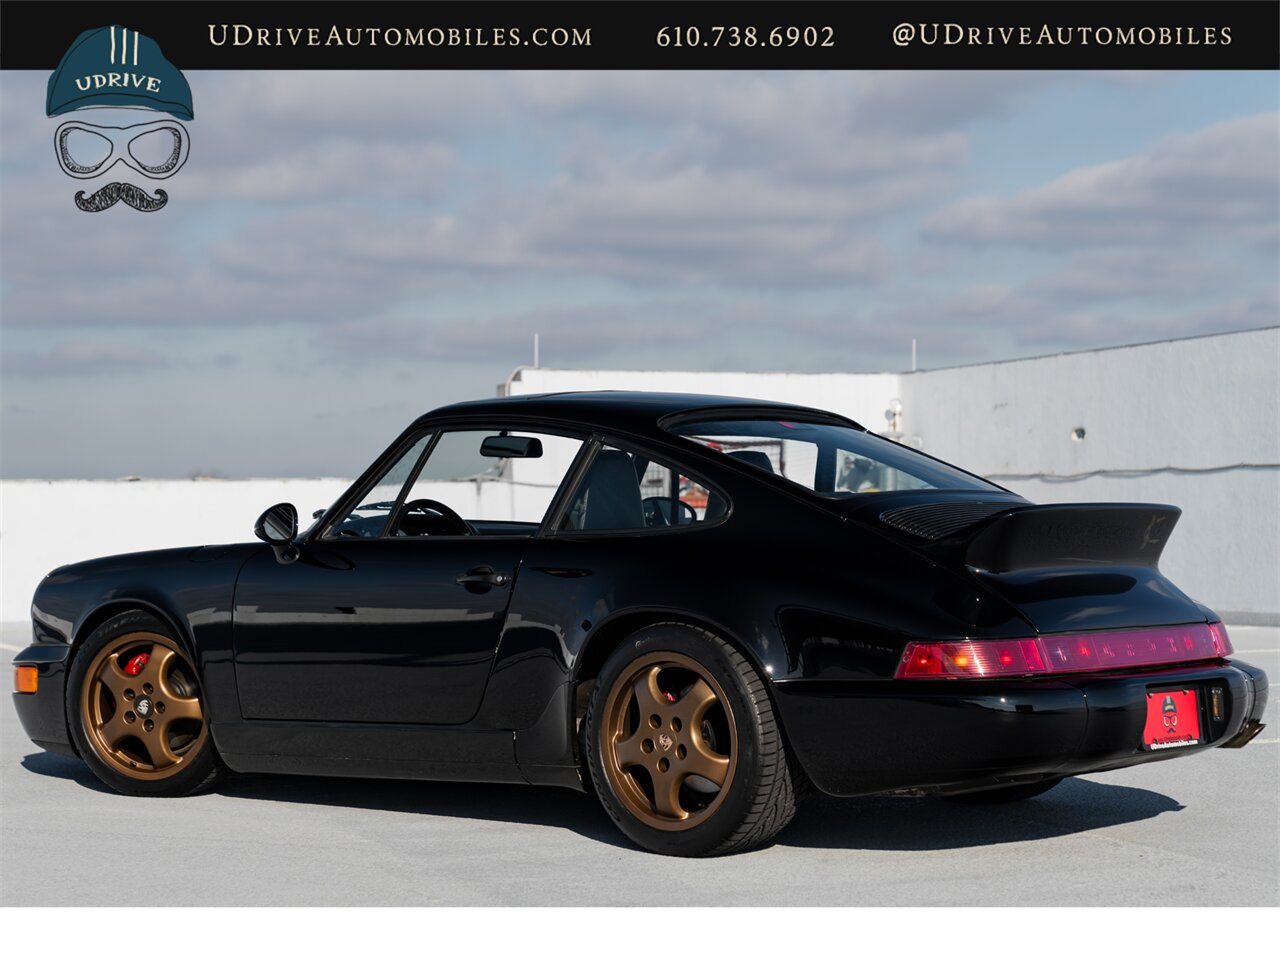 1989 Porsche 911 C4  964 Carrera 4 C4 5 Speed Manual $33k in Recent Service History - Photo 4 - West Chester, PA 19382